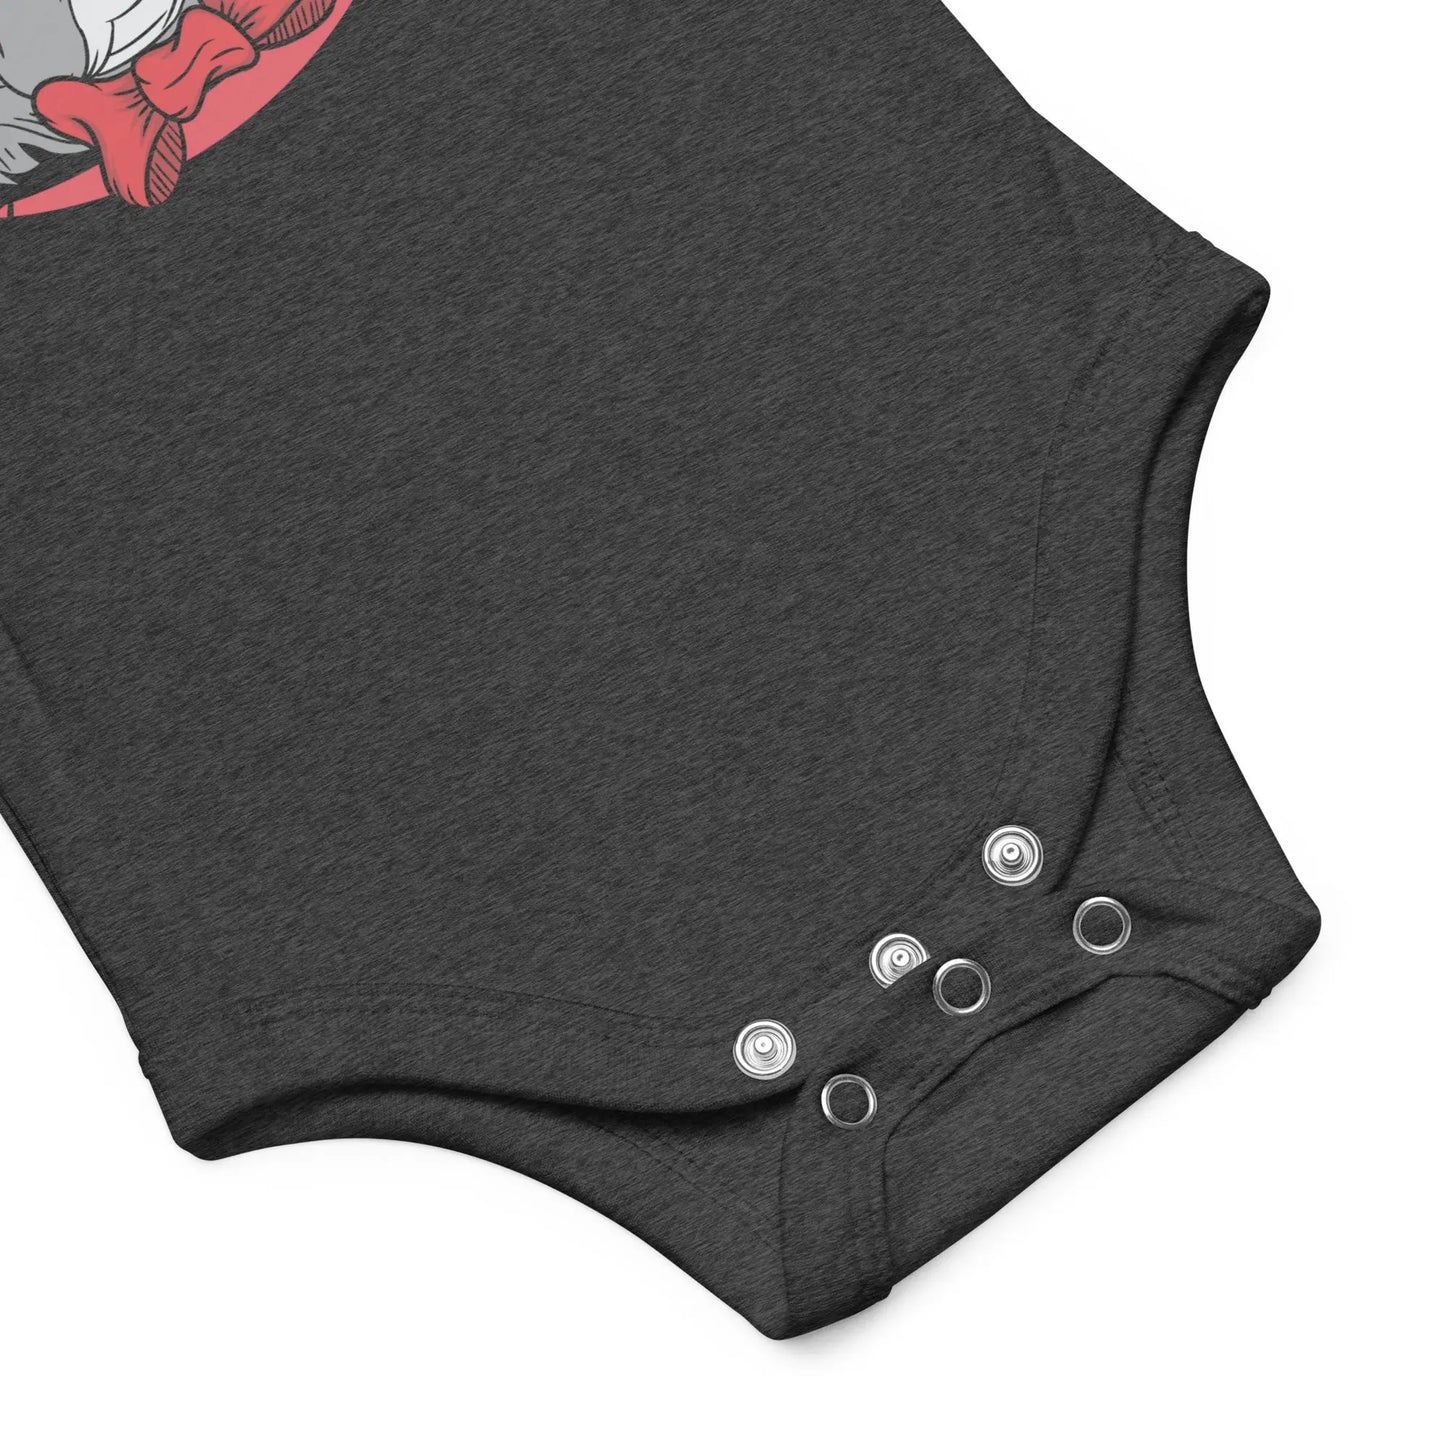 Vintage Dog Lovers - Bitcoin Baby Body Suit - One Piece with Short Sleeve Grey Heather